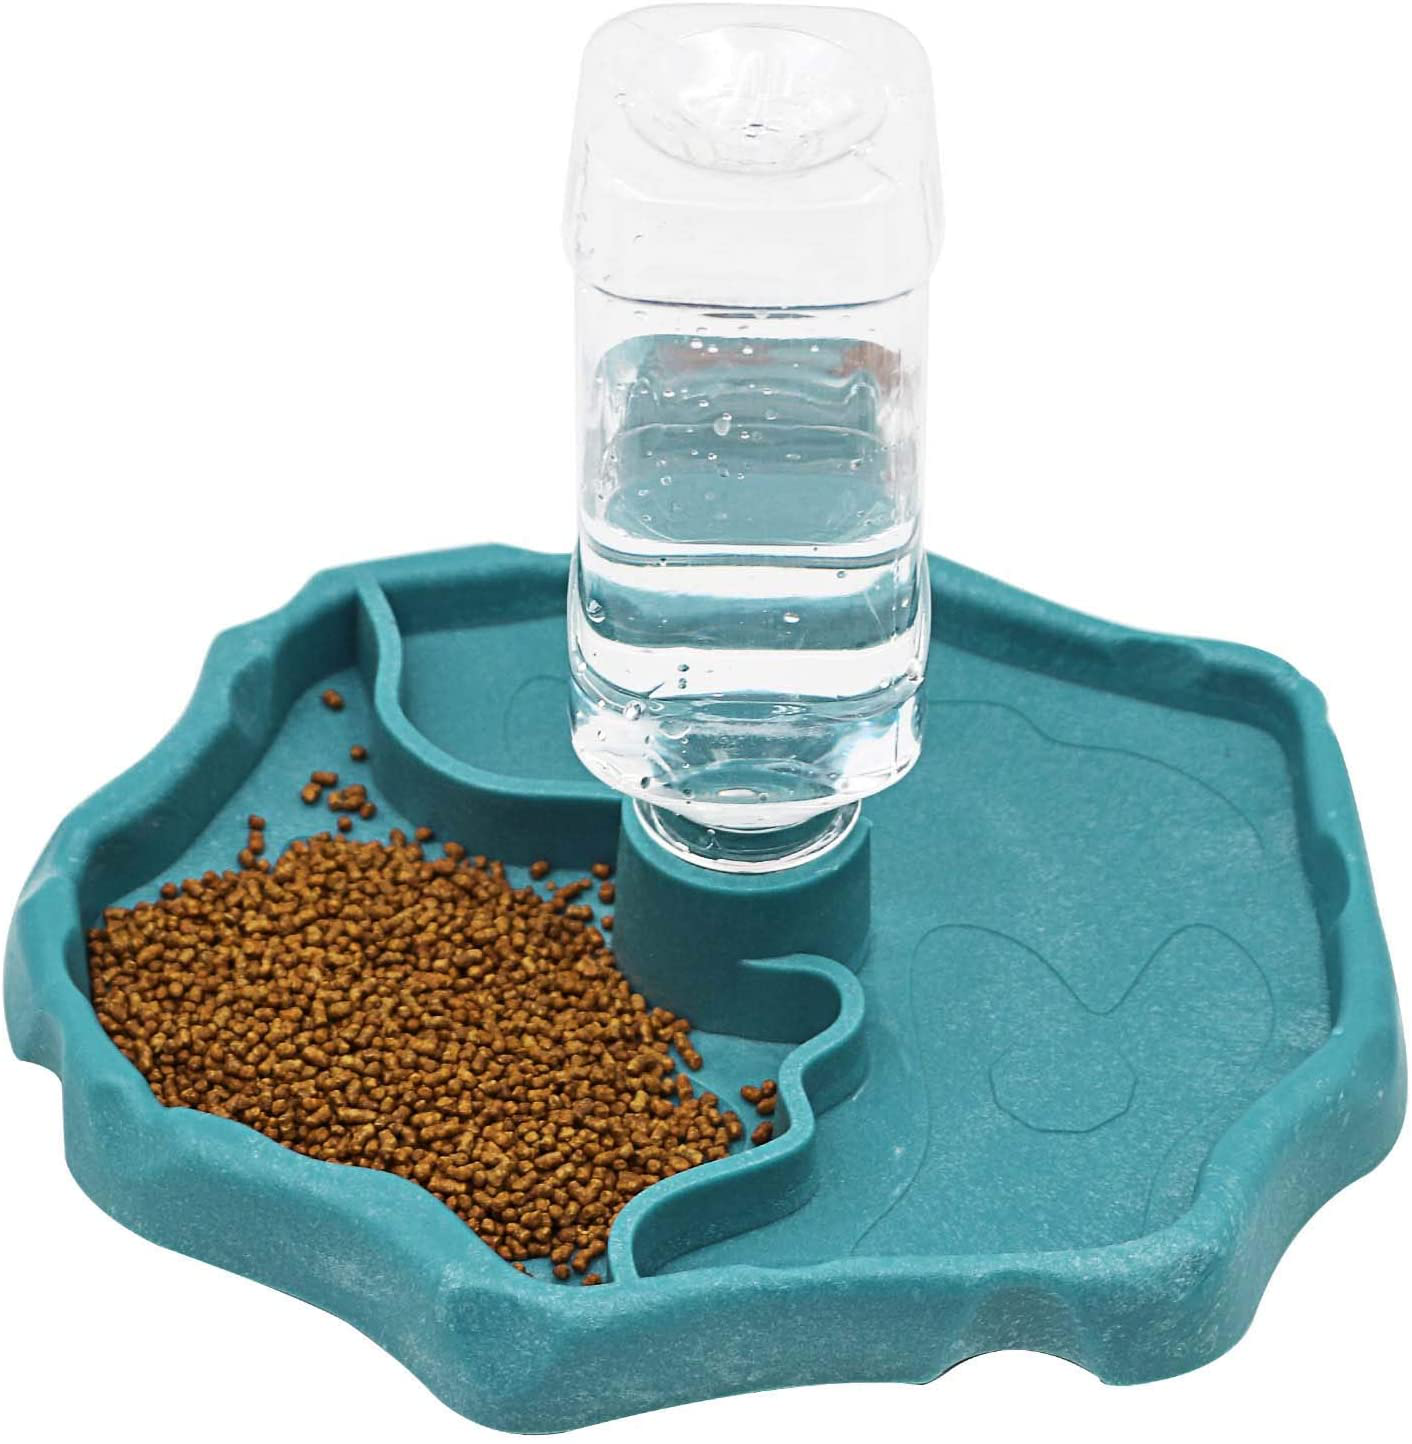 MACGOAL Automatic Reptile Feeder Reptile Food and Water Dish Bowl Reptile Water Dish with Bottle Tortoise Turtle Water Dispenser for Bearded Dragon Gecko Lizard (Blue)